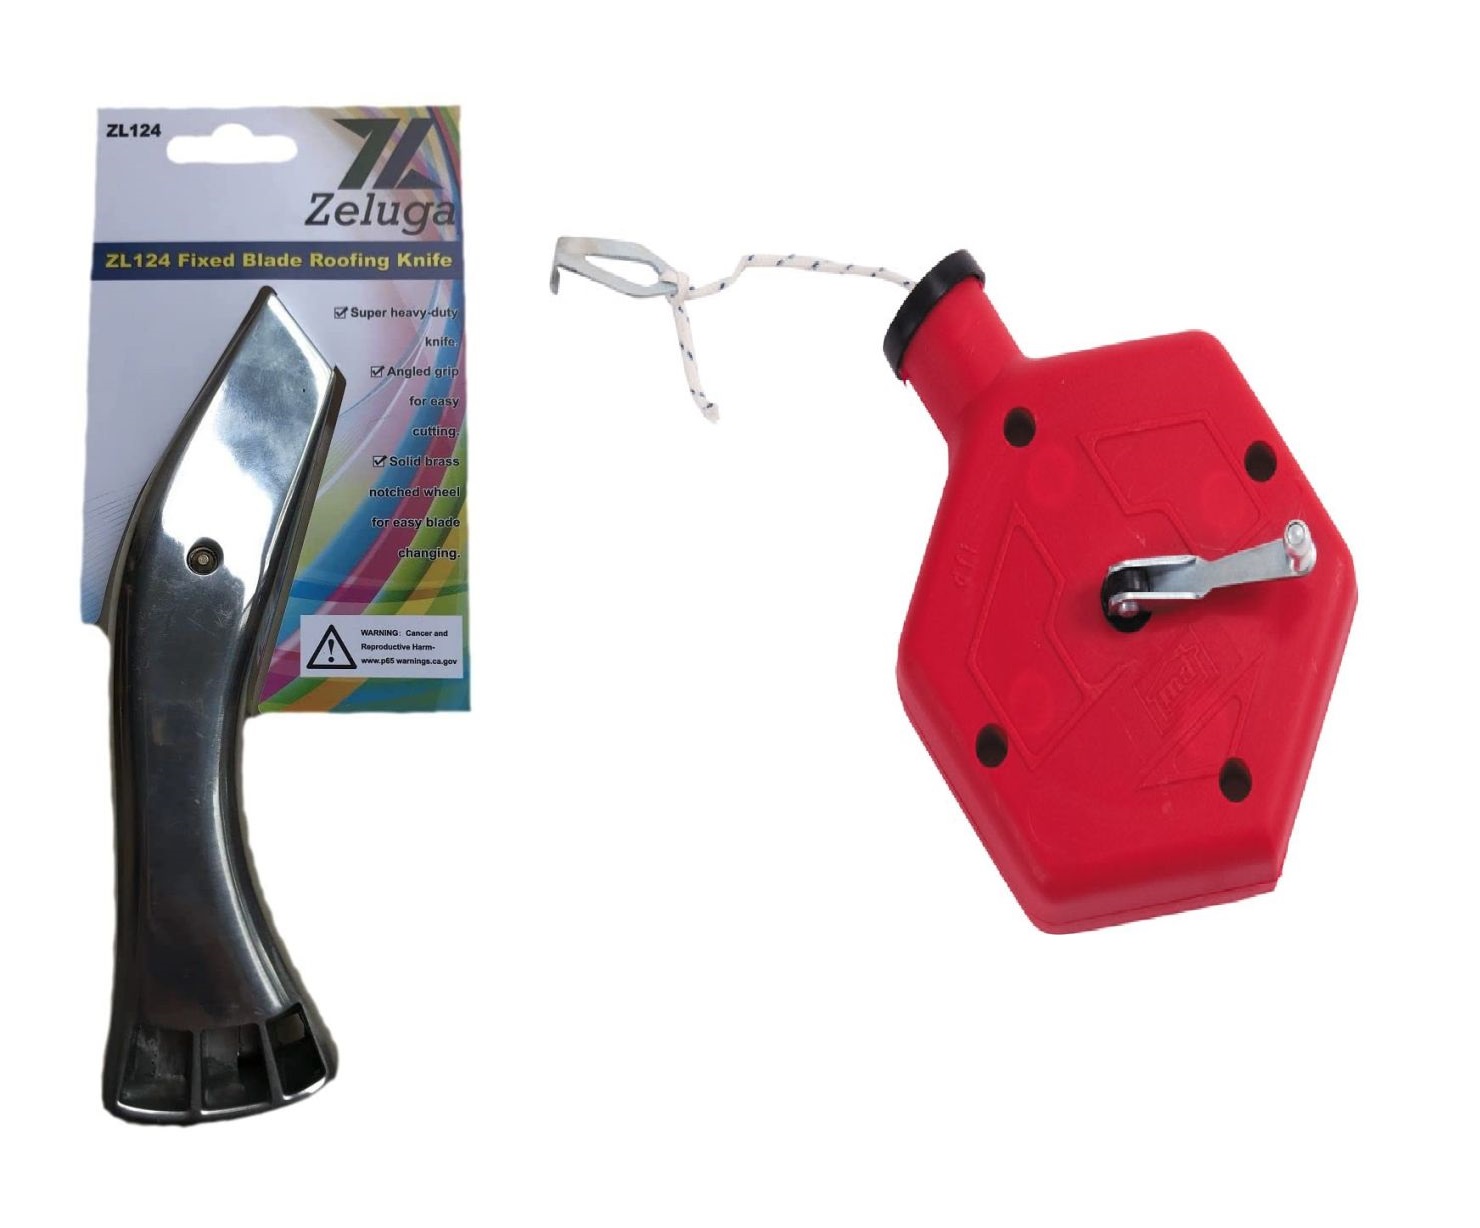 19-303 Fixed Blade Roofing Knife and 100ft. Contractor Chalk Reel Combo Pack